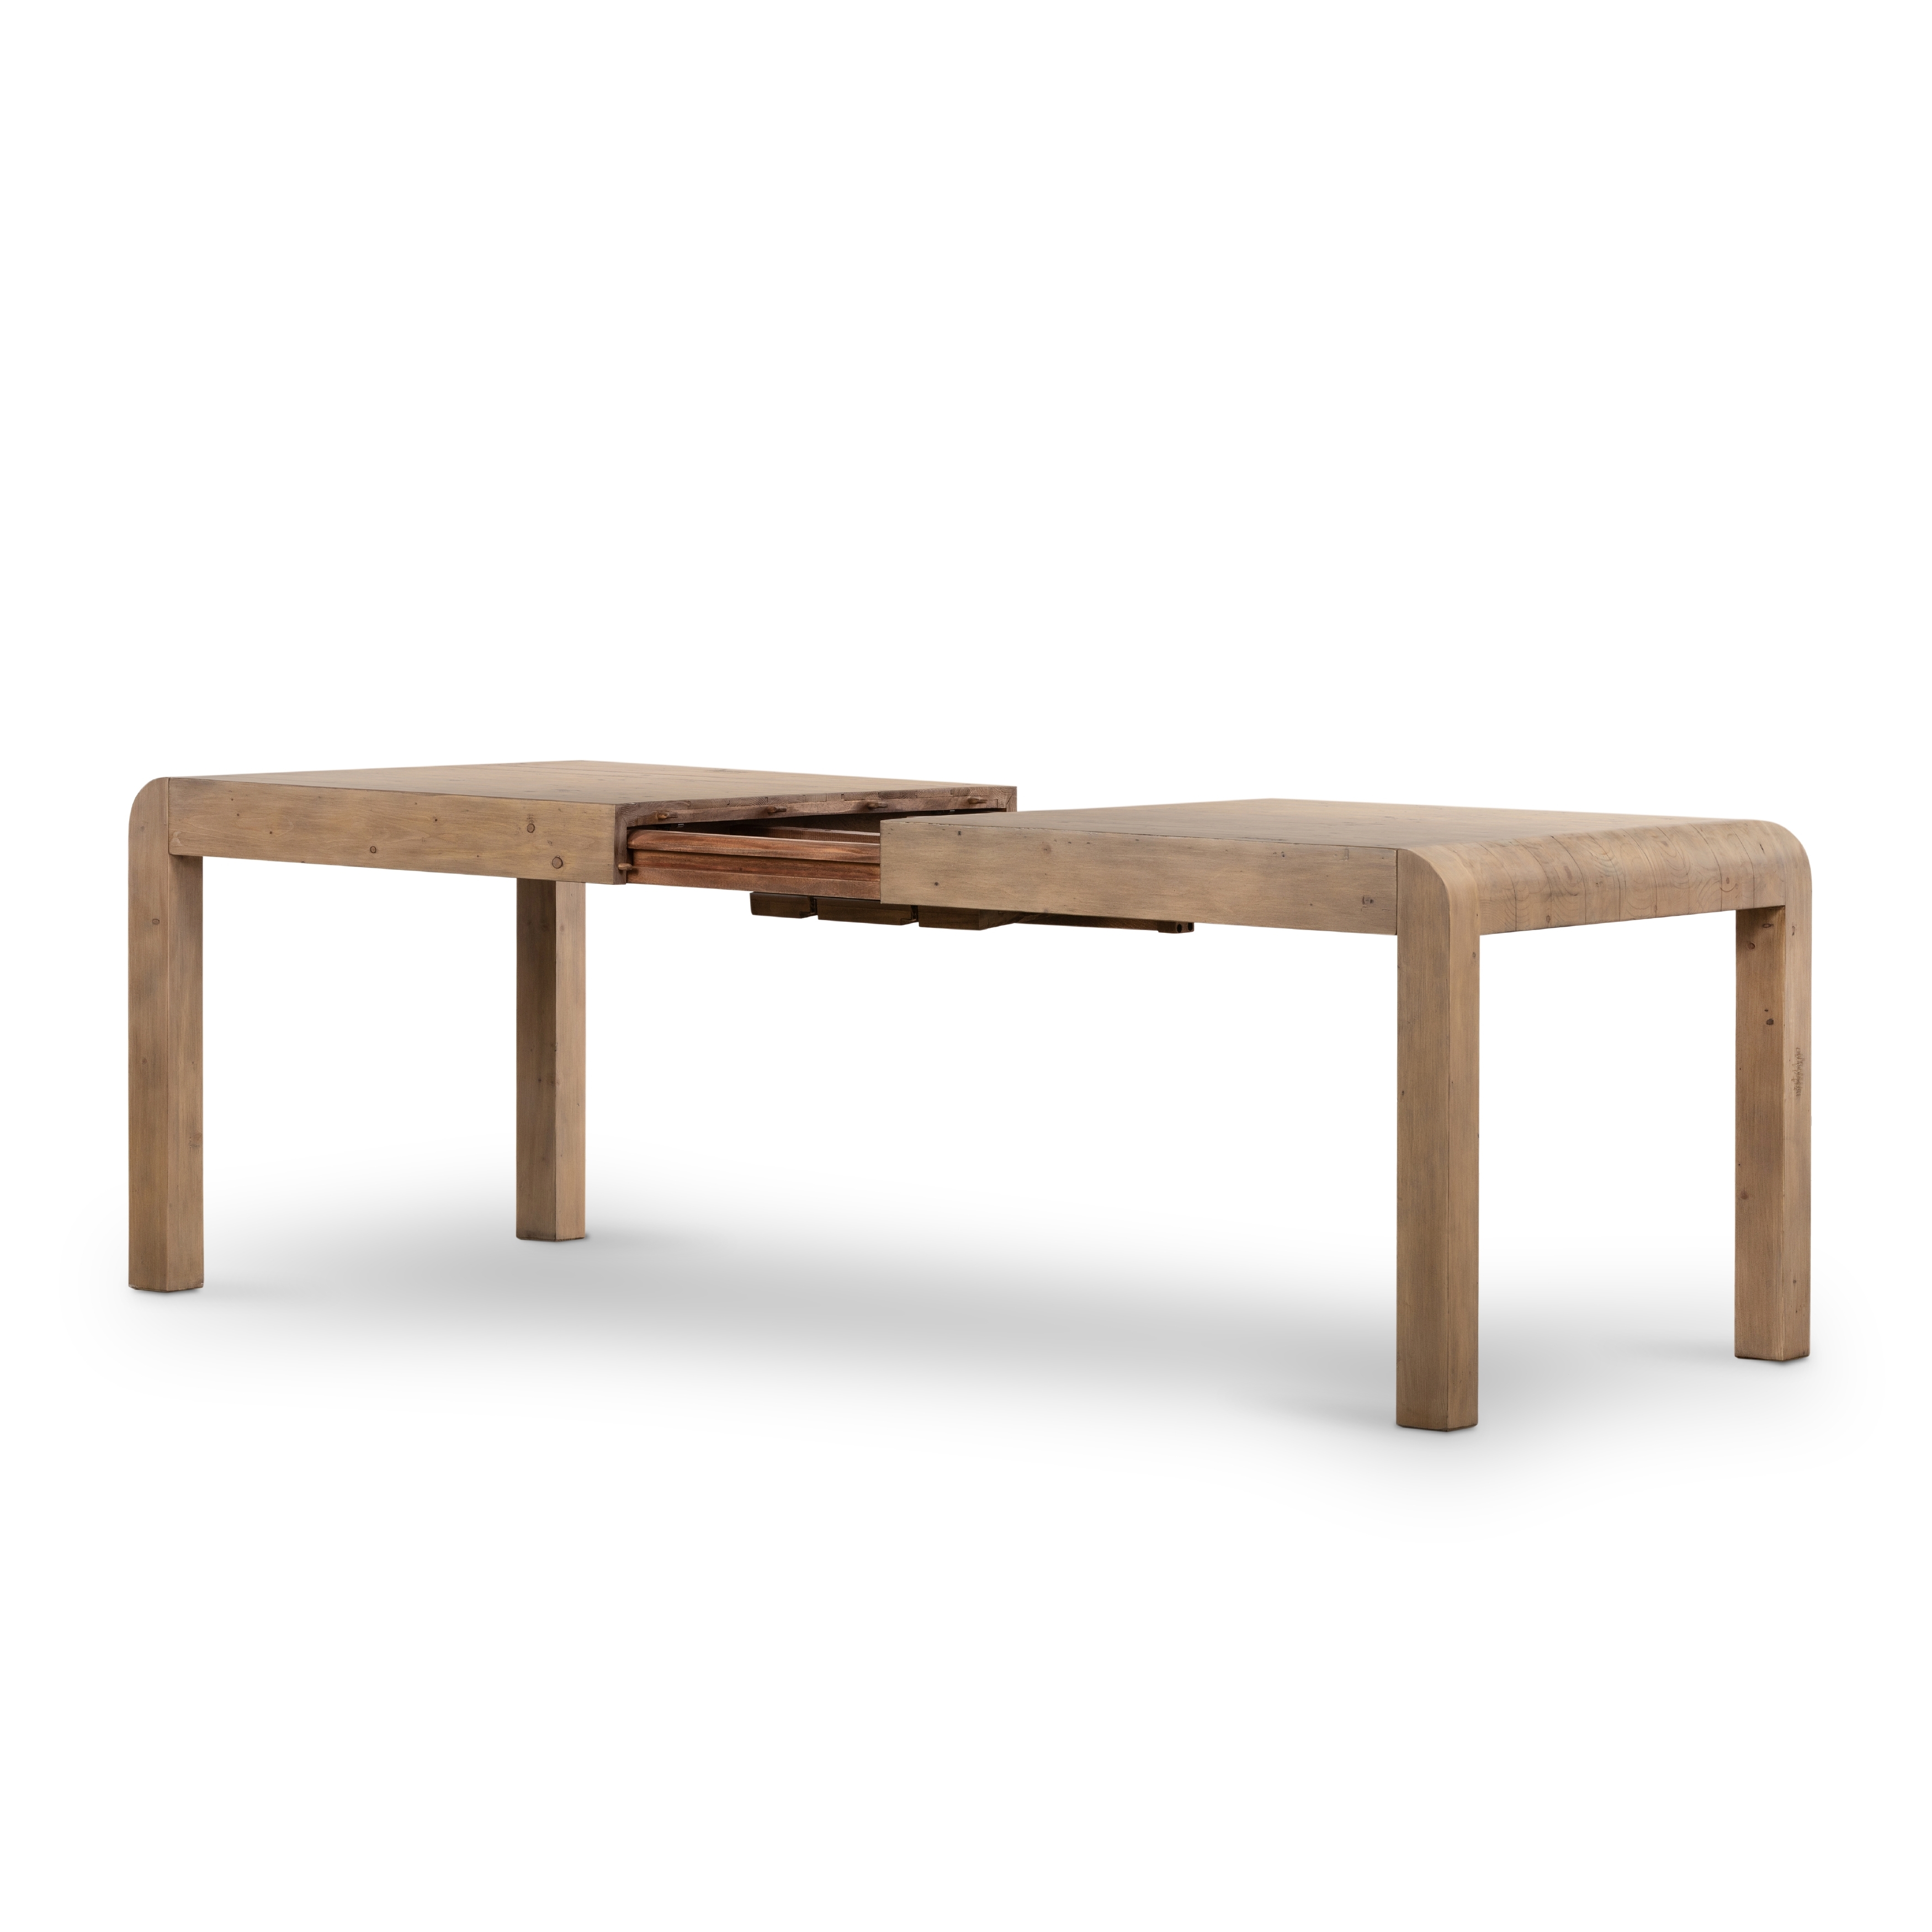 Everson 71" Extension Dining Table-Teak - Image 3